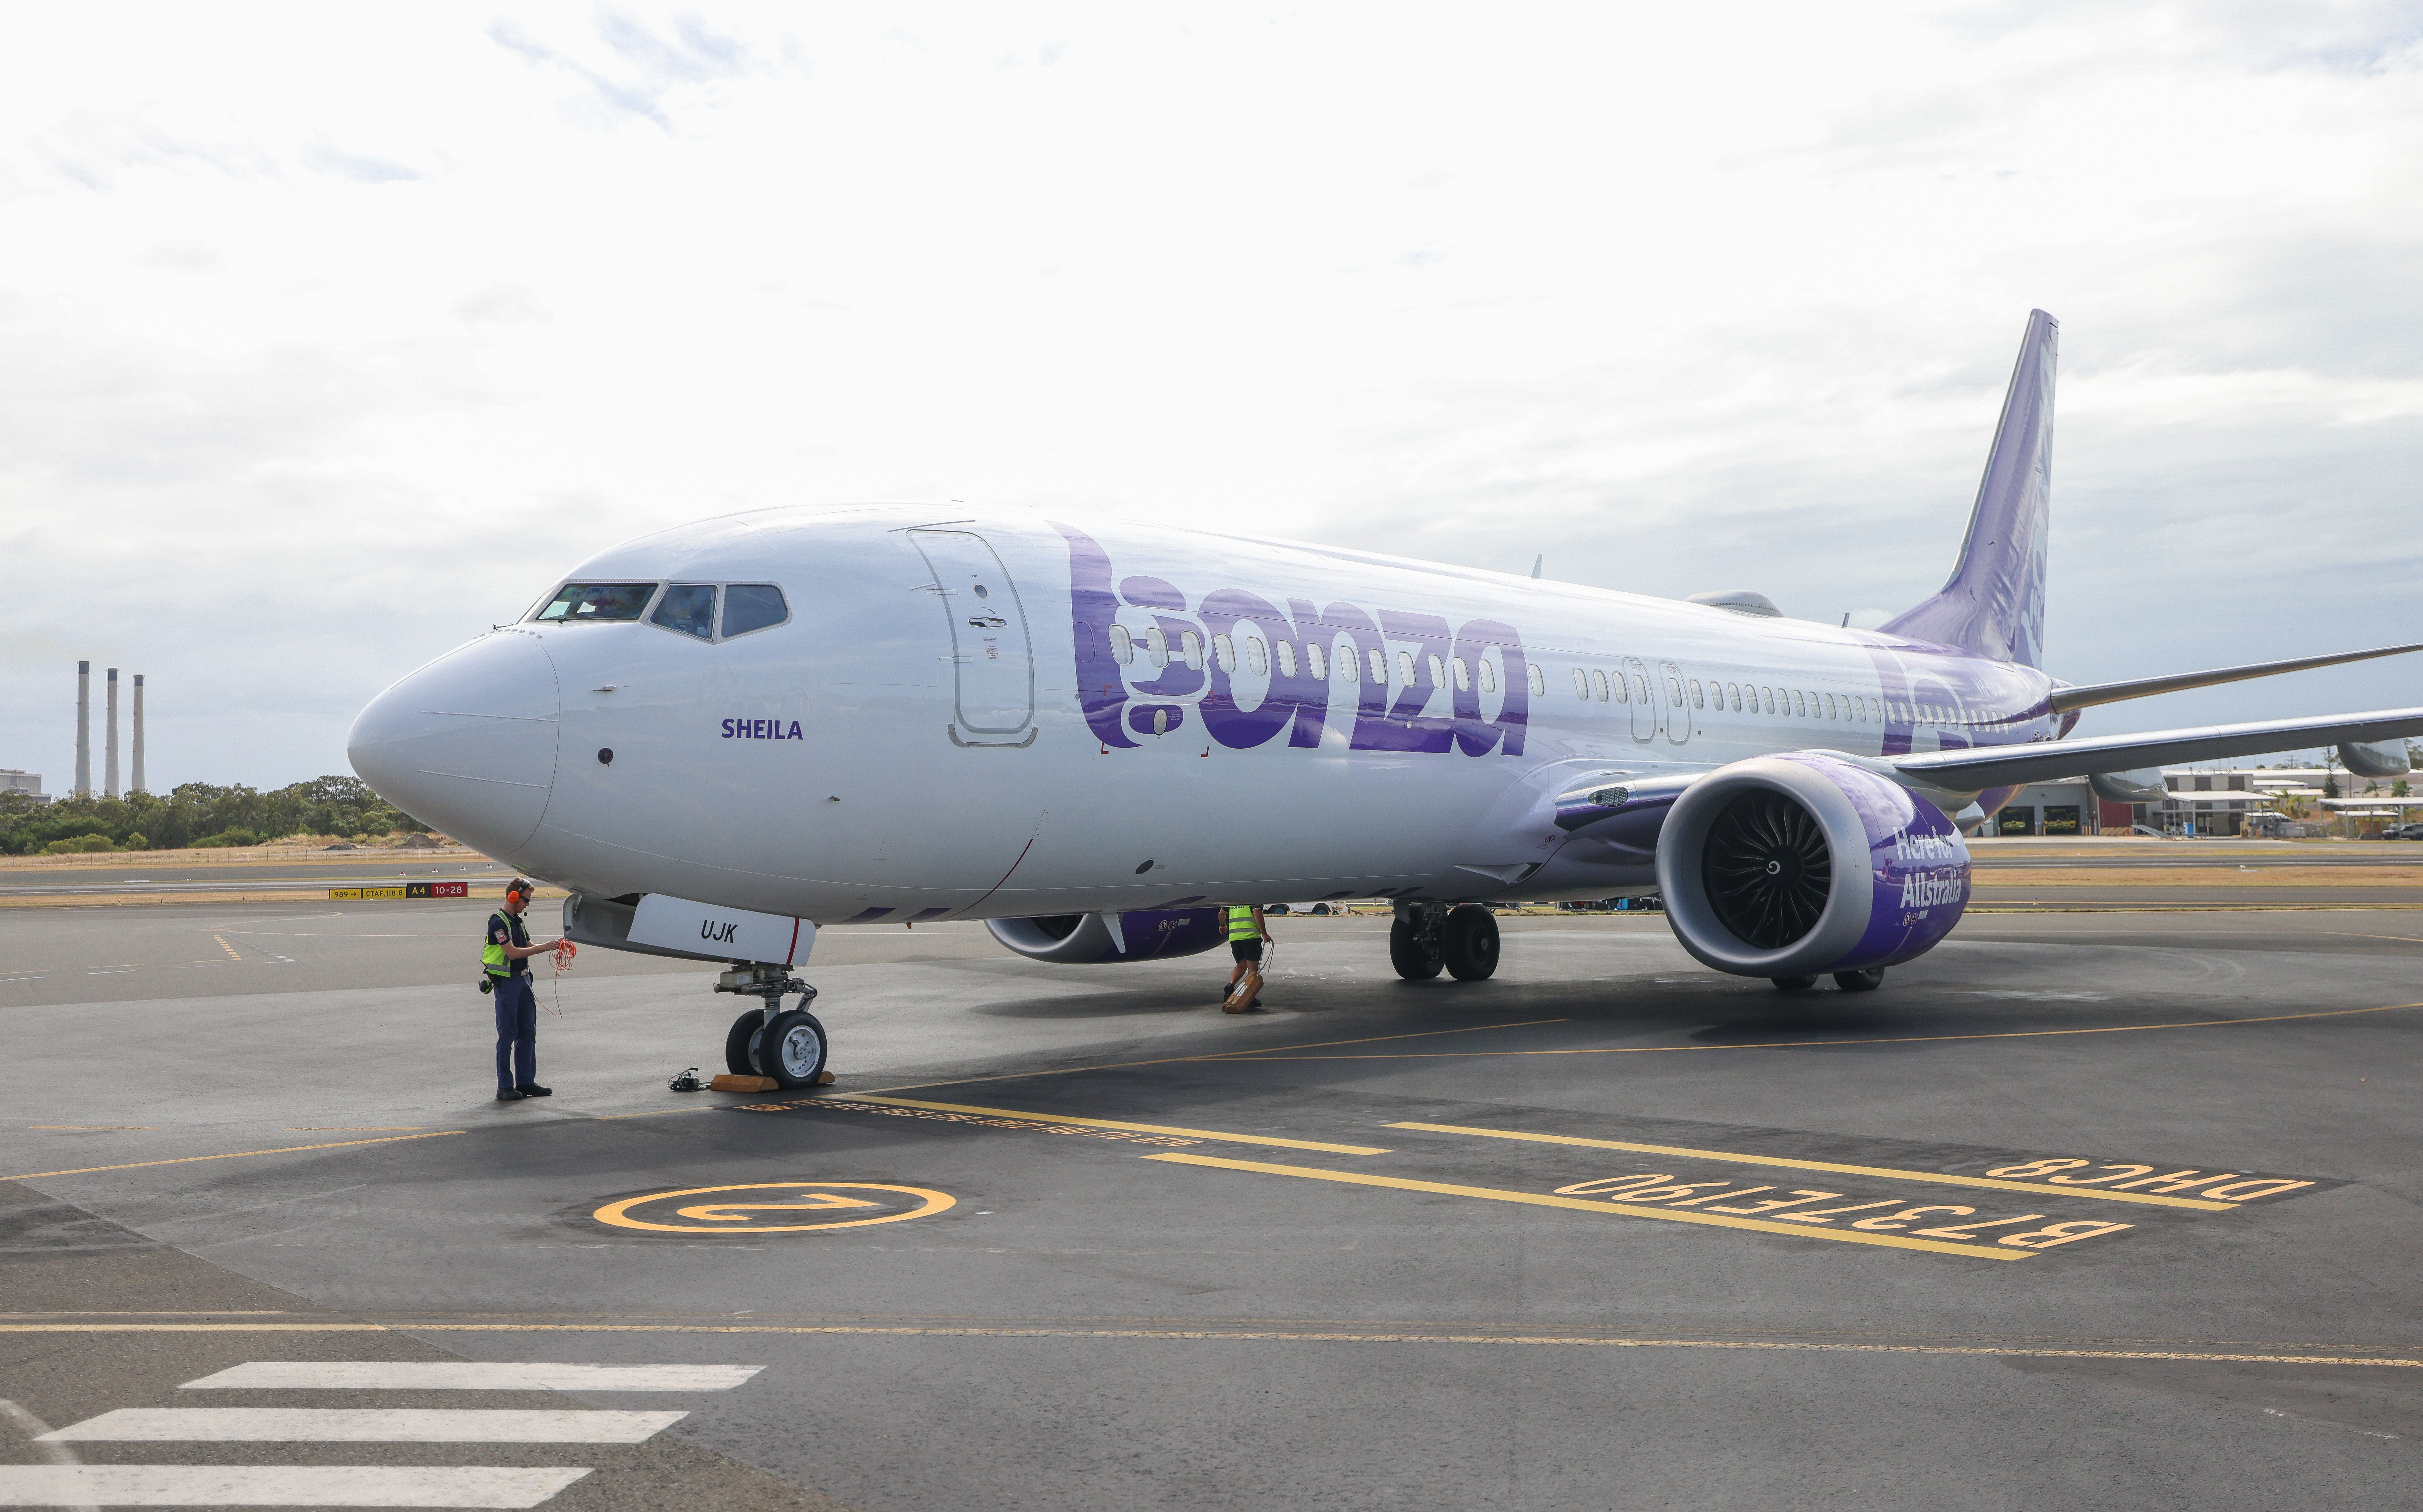 Bonza’s 737 MAXs Bringing Low Fare Flying Flying To 17 Destinations